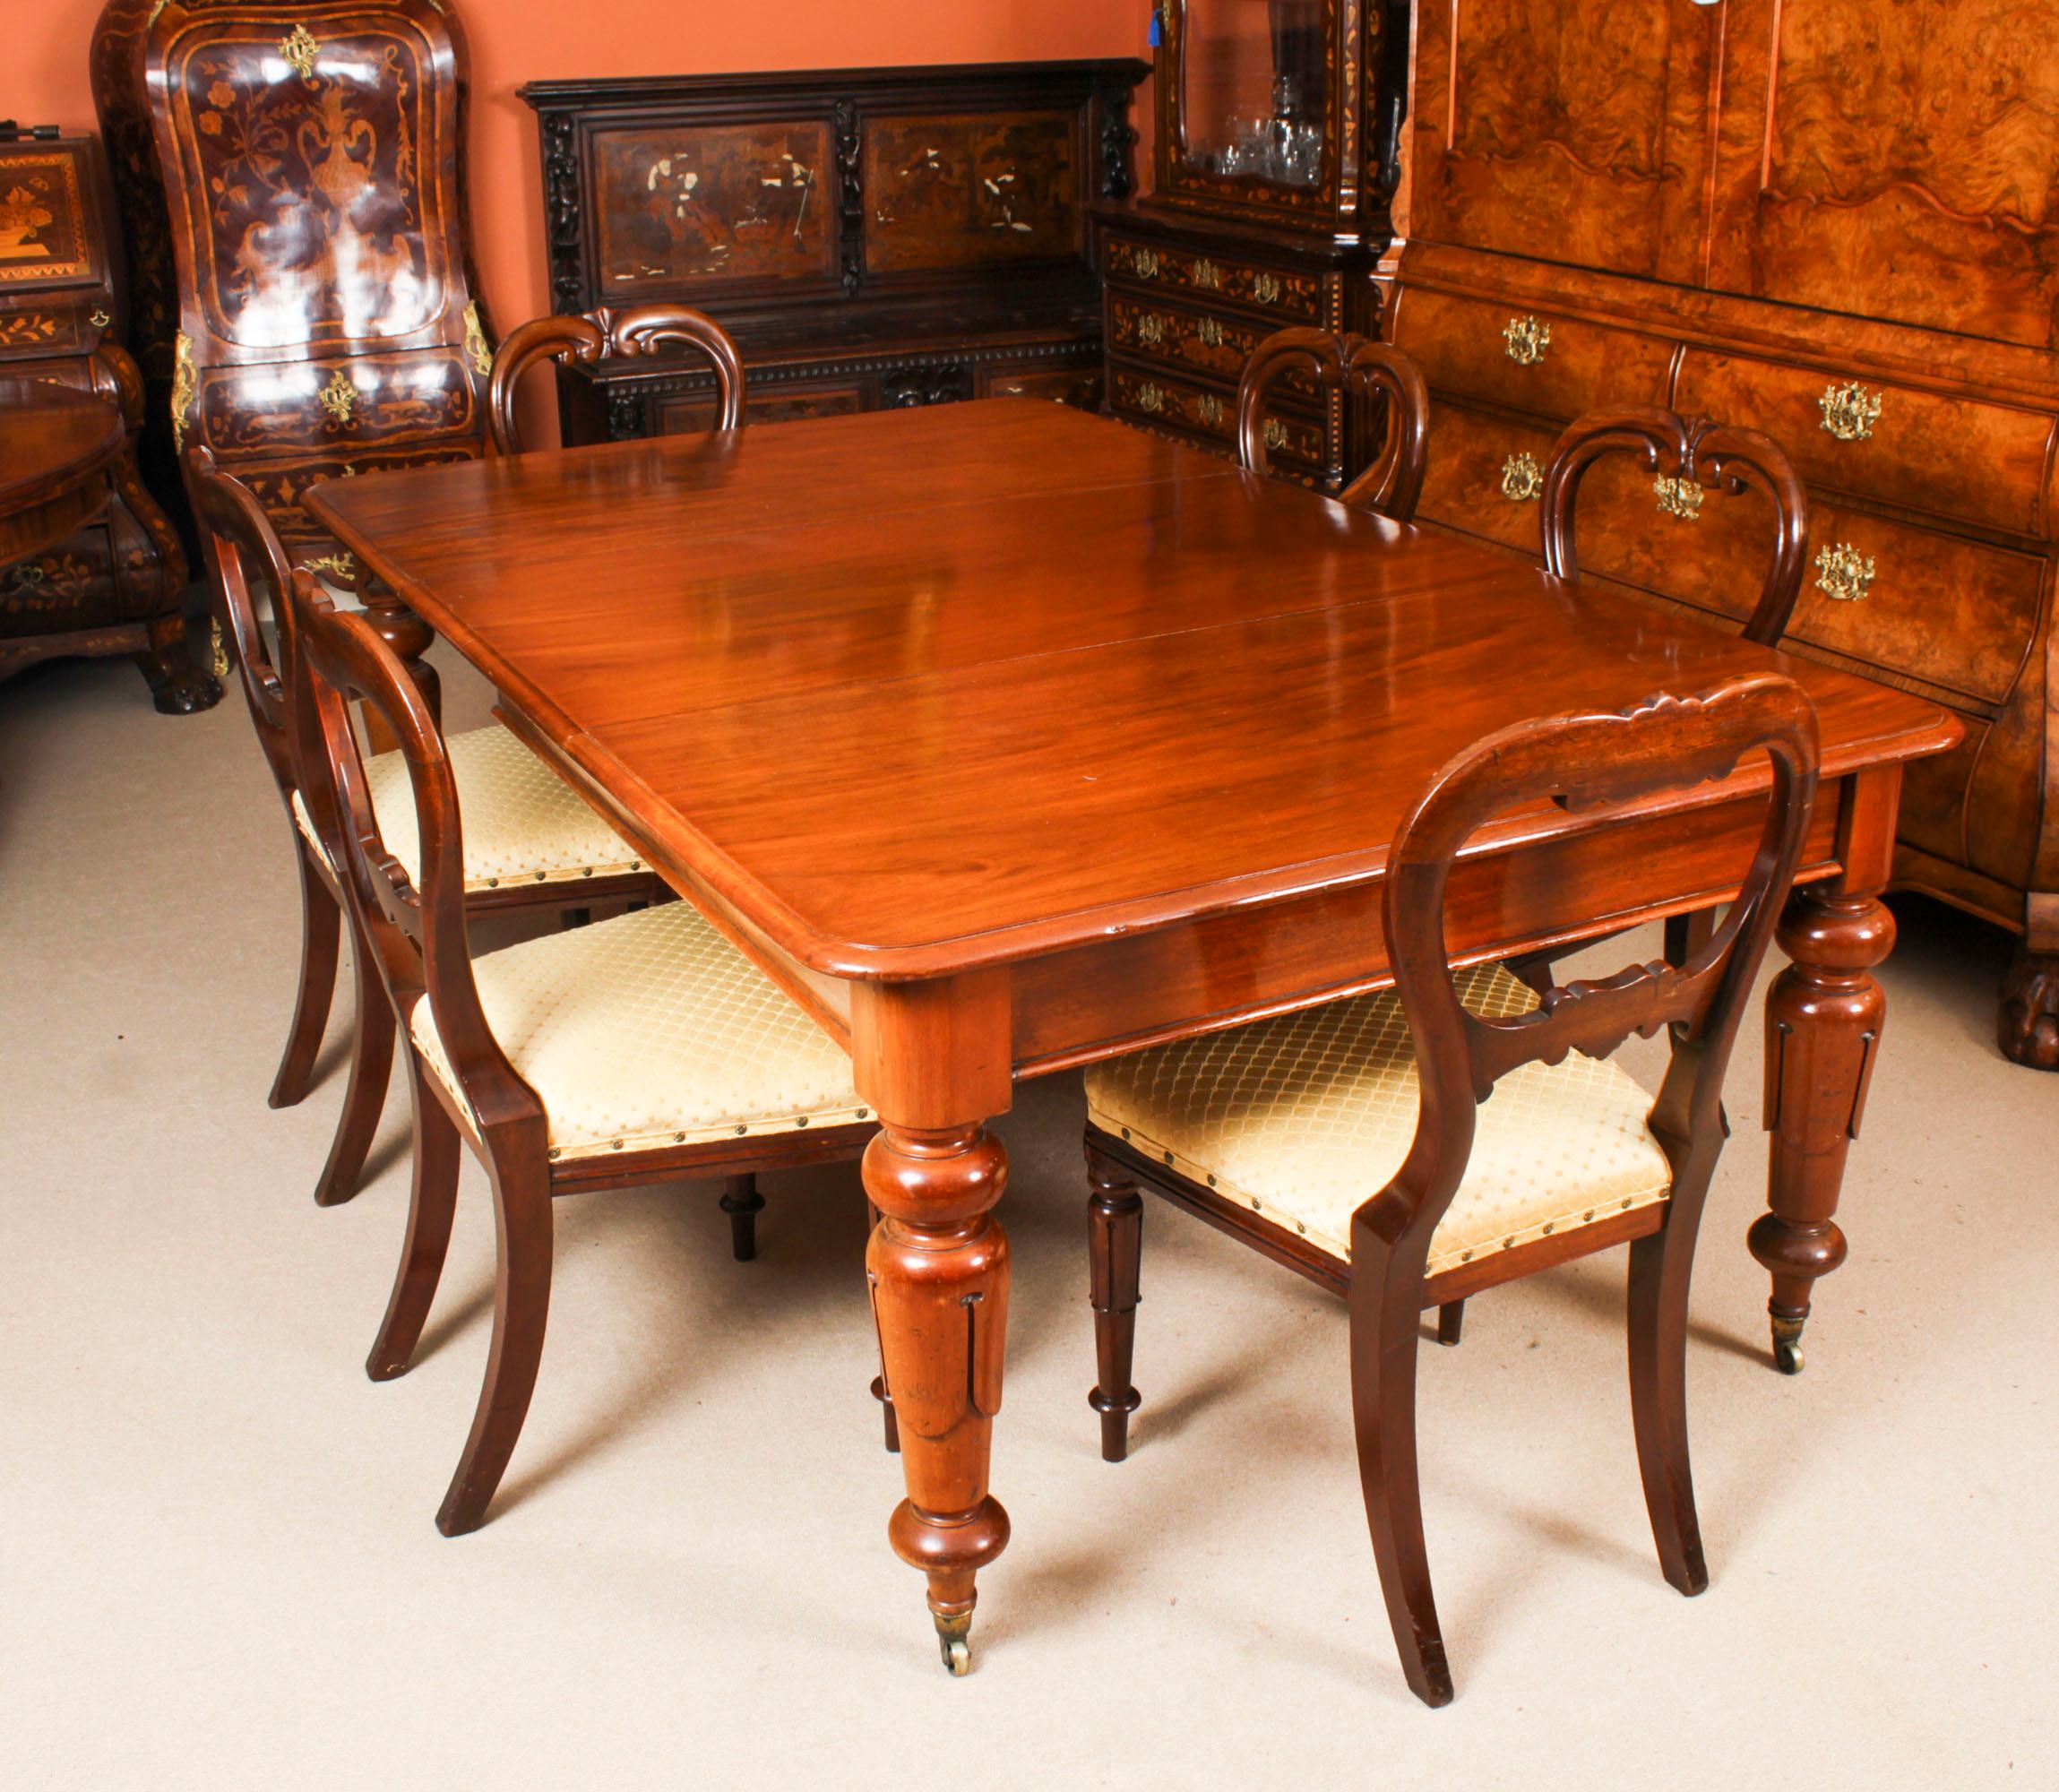 Mid-19th Century Antique William IV Flame Mahogany Extending Dining Table 19th Century